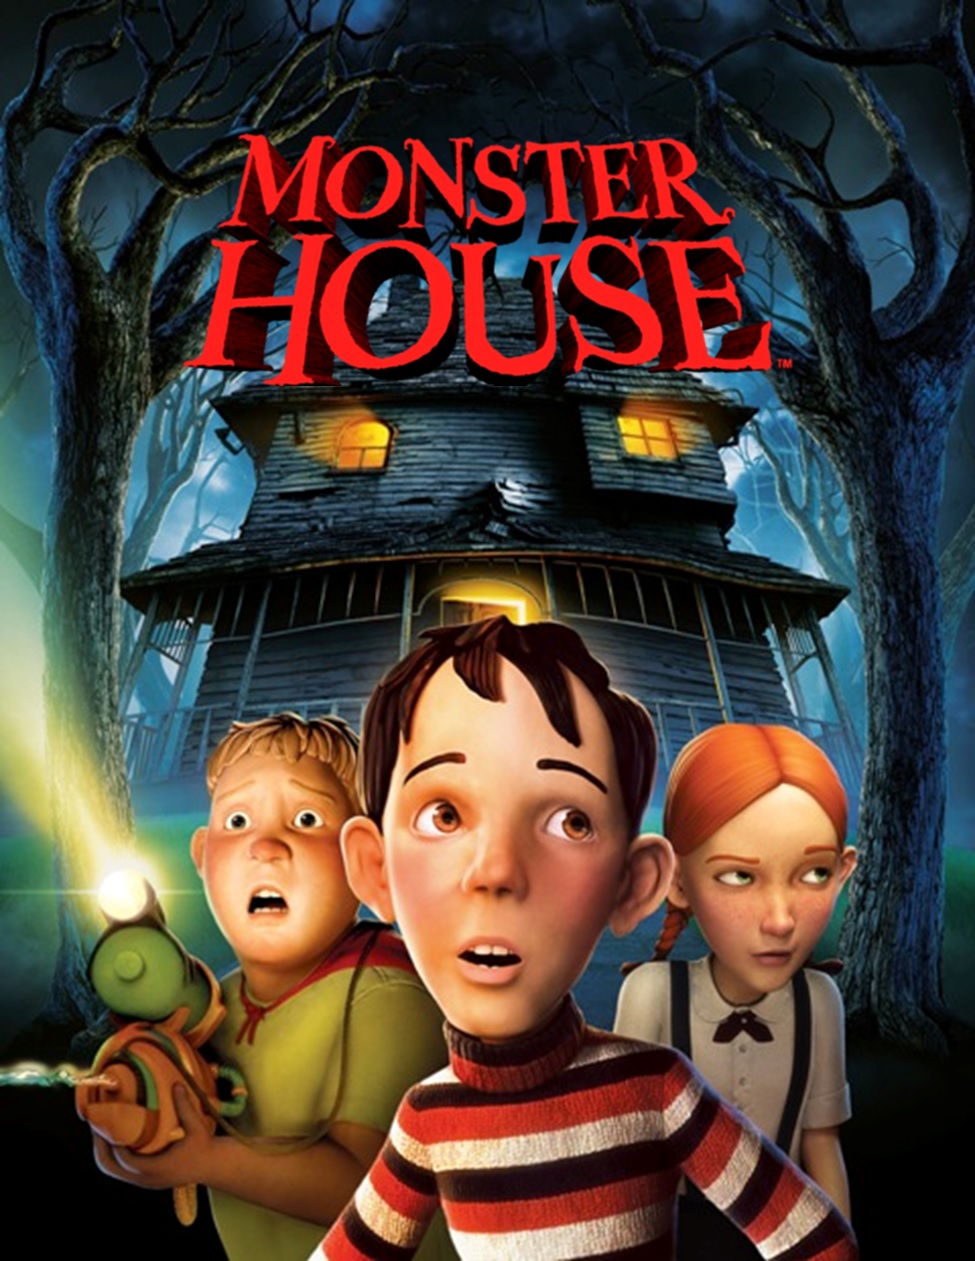 Why "Monster House" fits the genres it is given